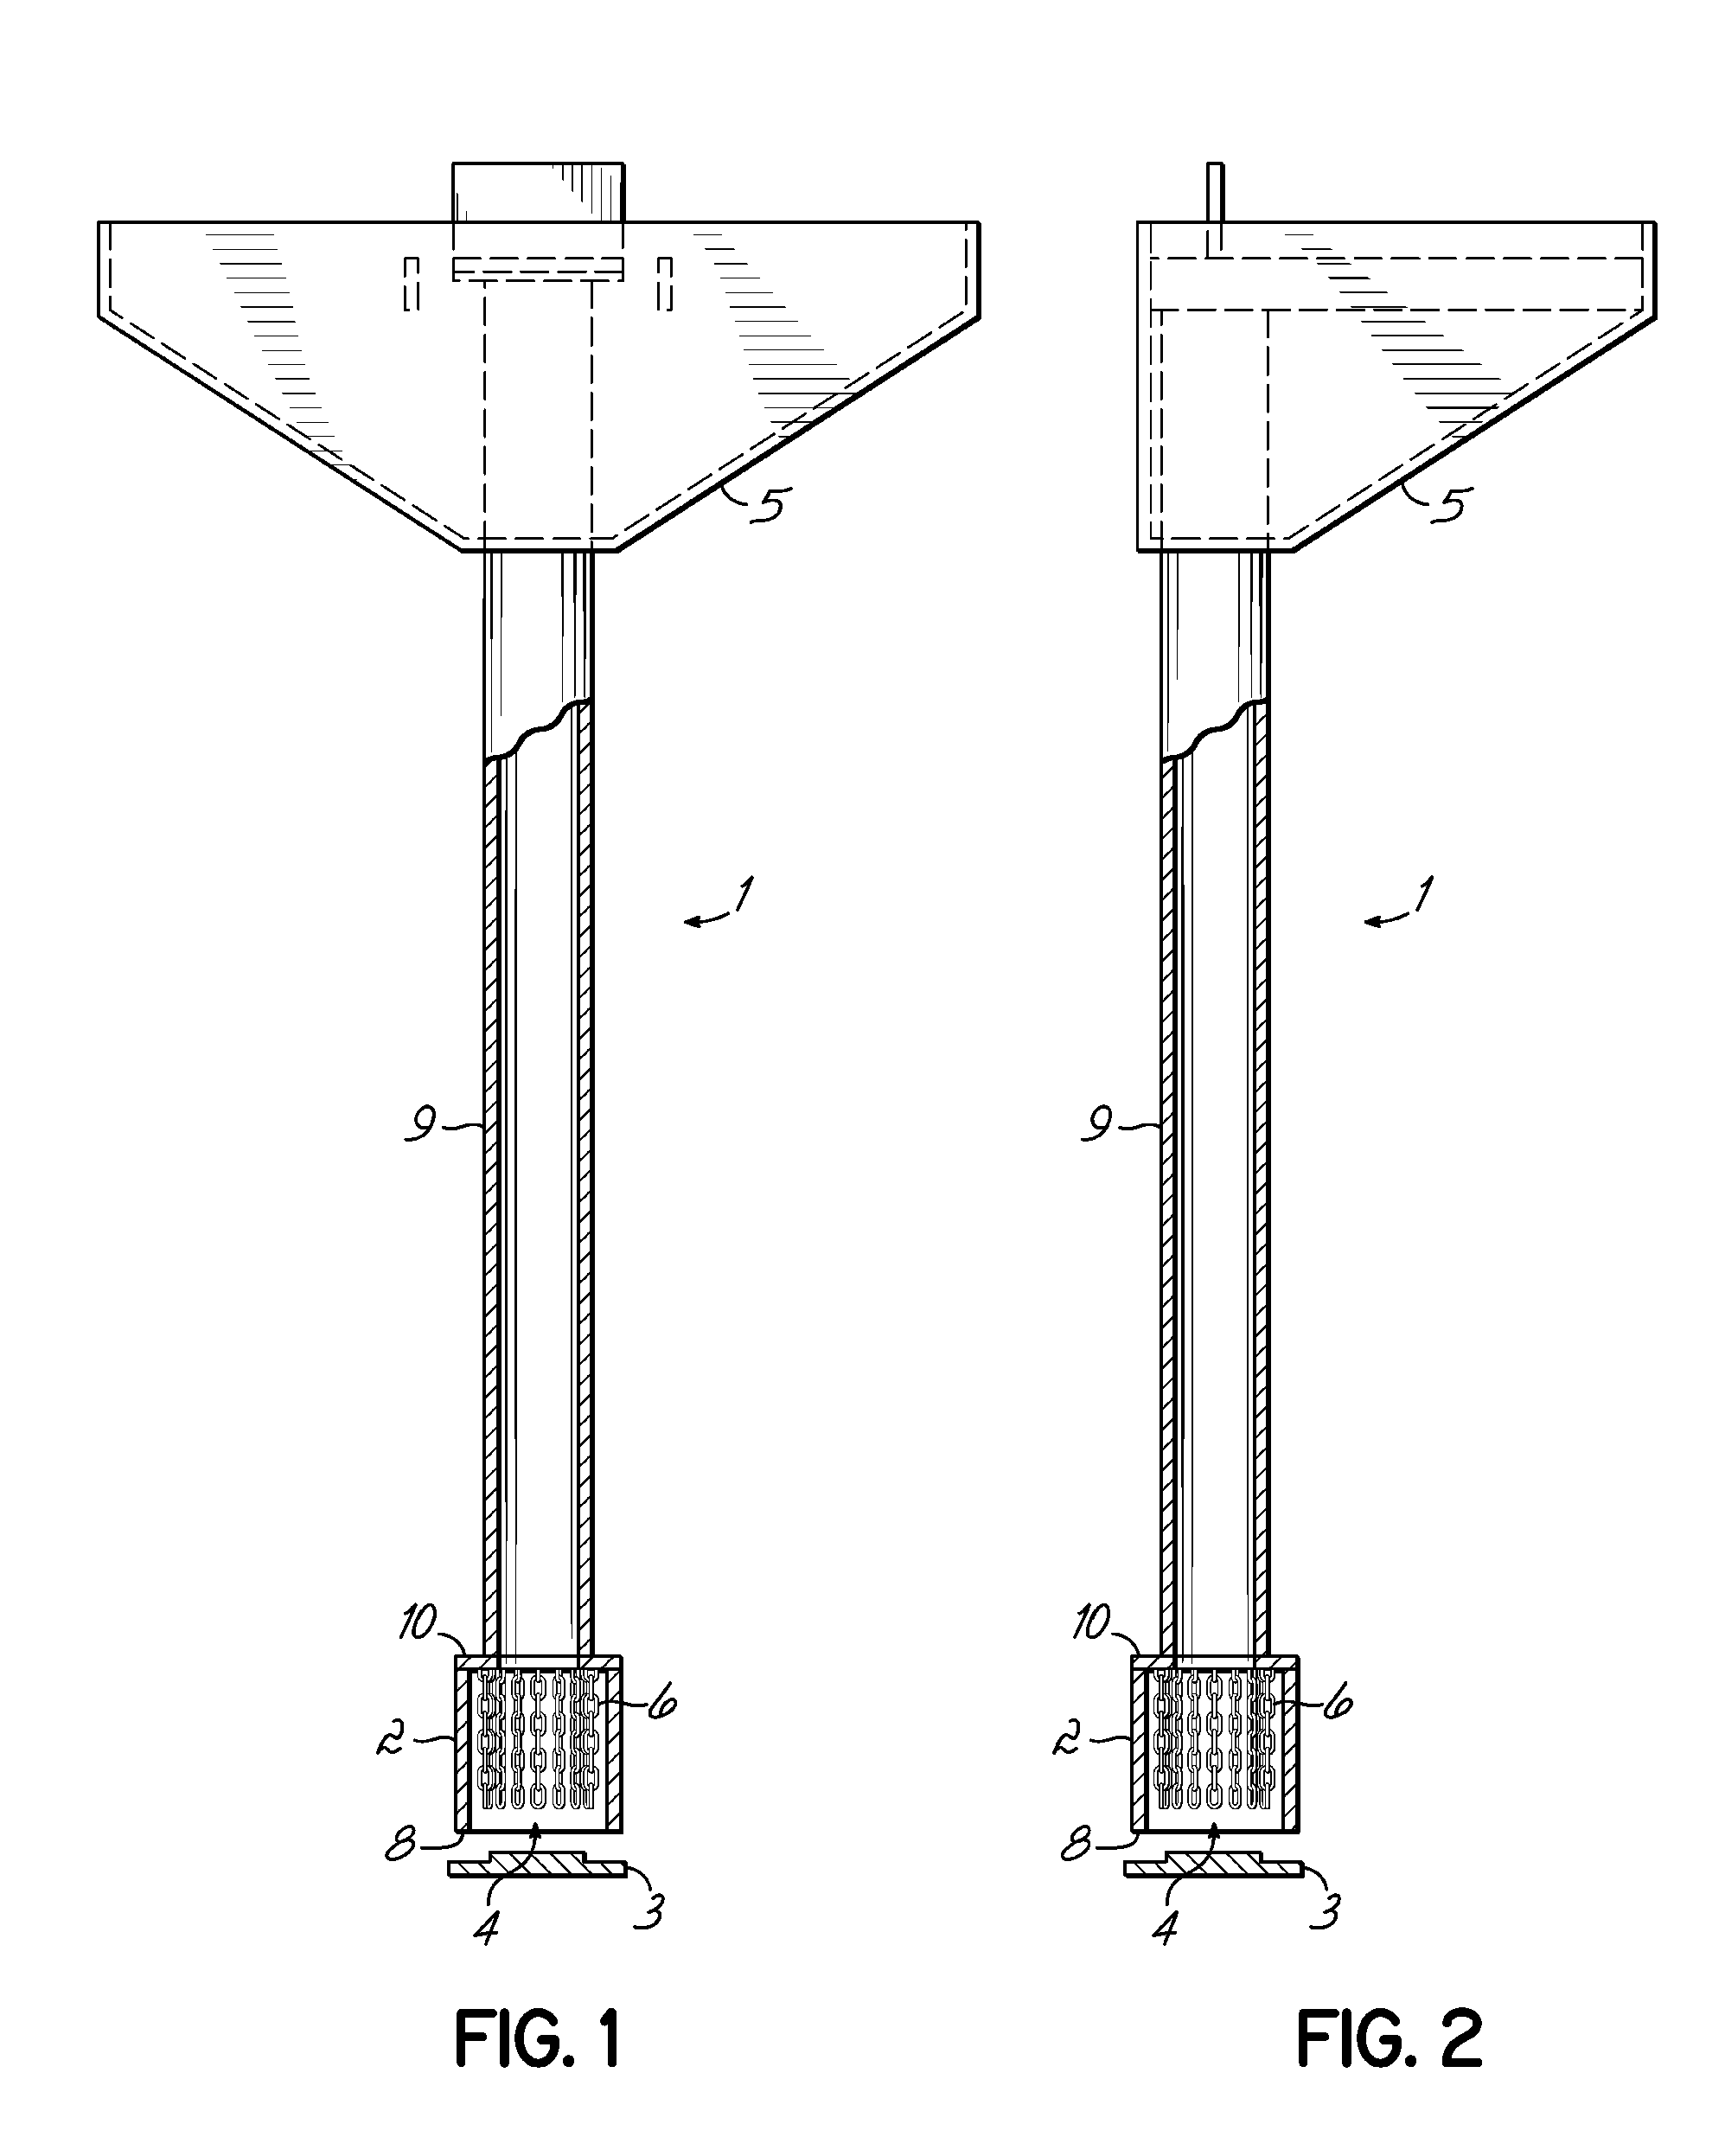 Method and apparatus for creating support columns using a hollow mandrel with upward flow restrictors